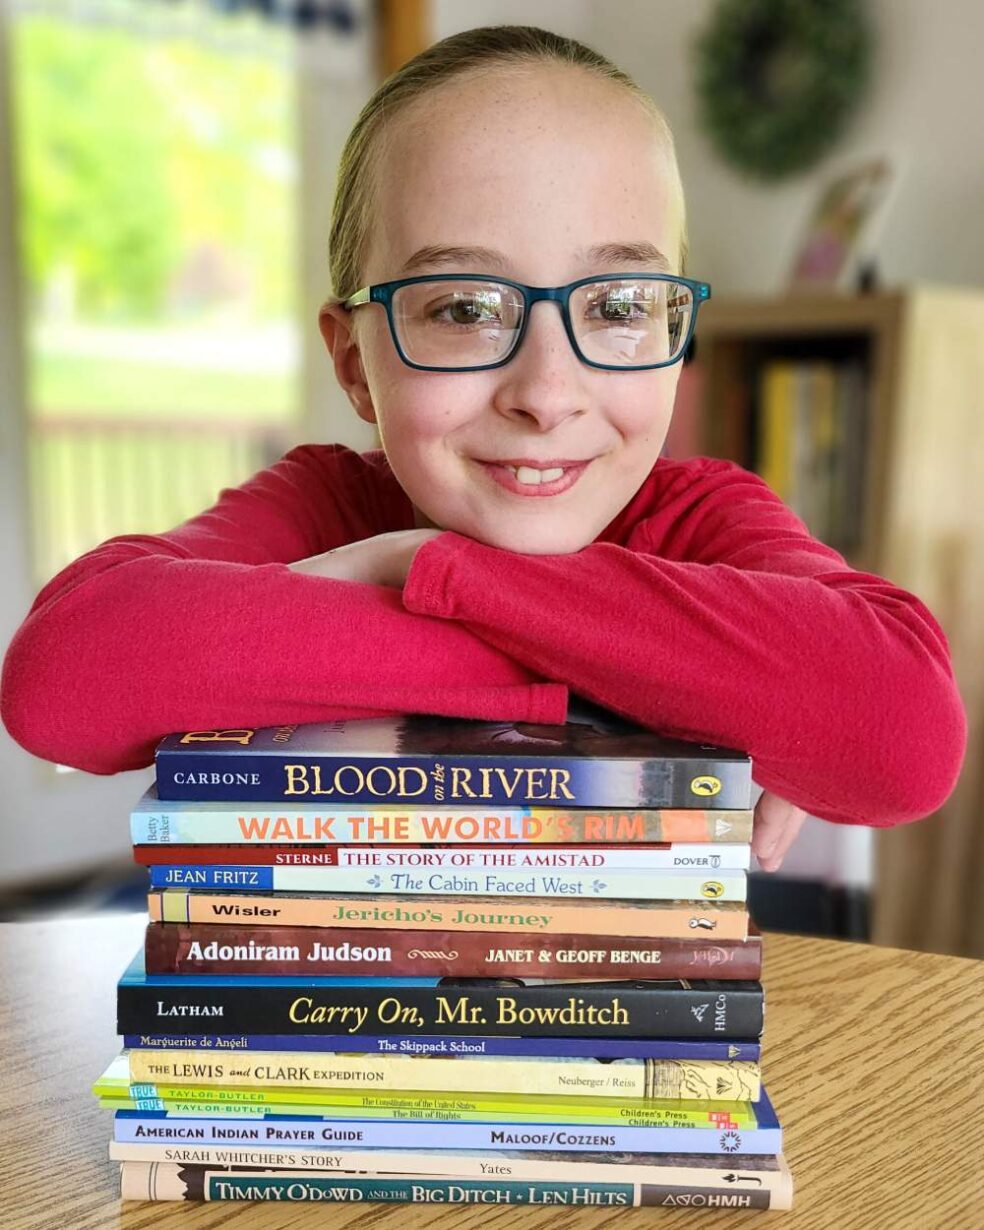 Smiling girl in red shirt with blue glasses, leaning her arms on a stack of living history books